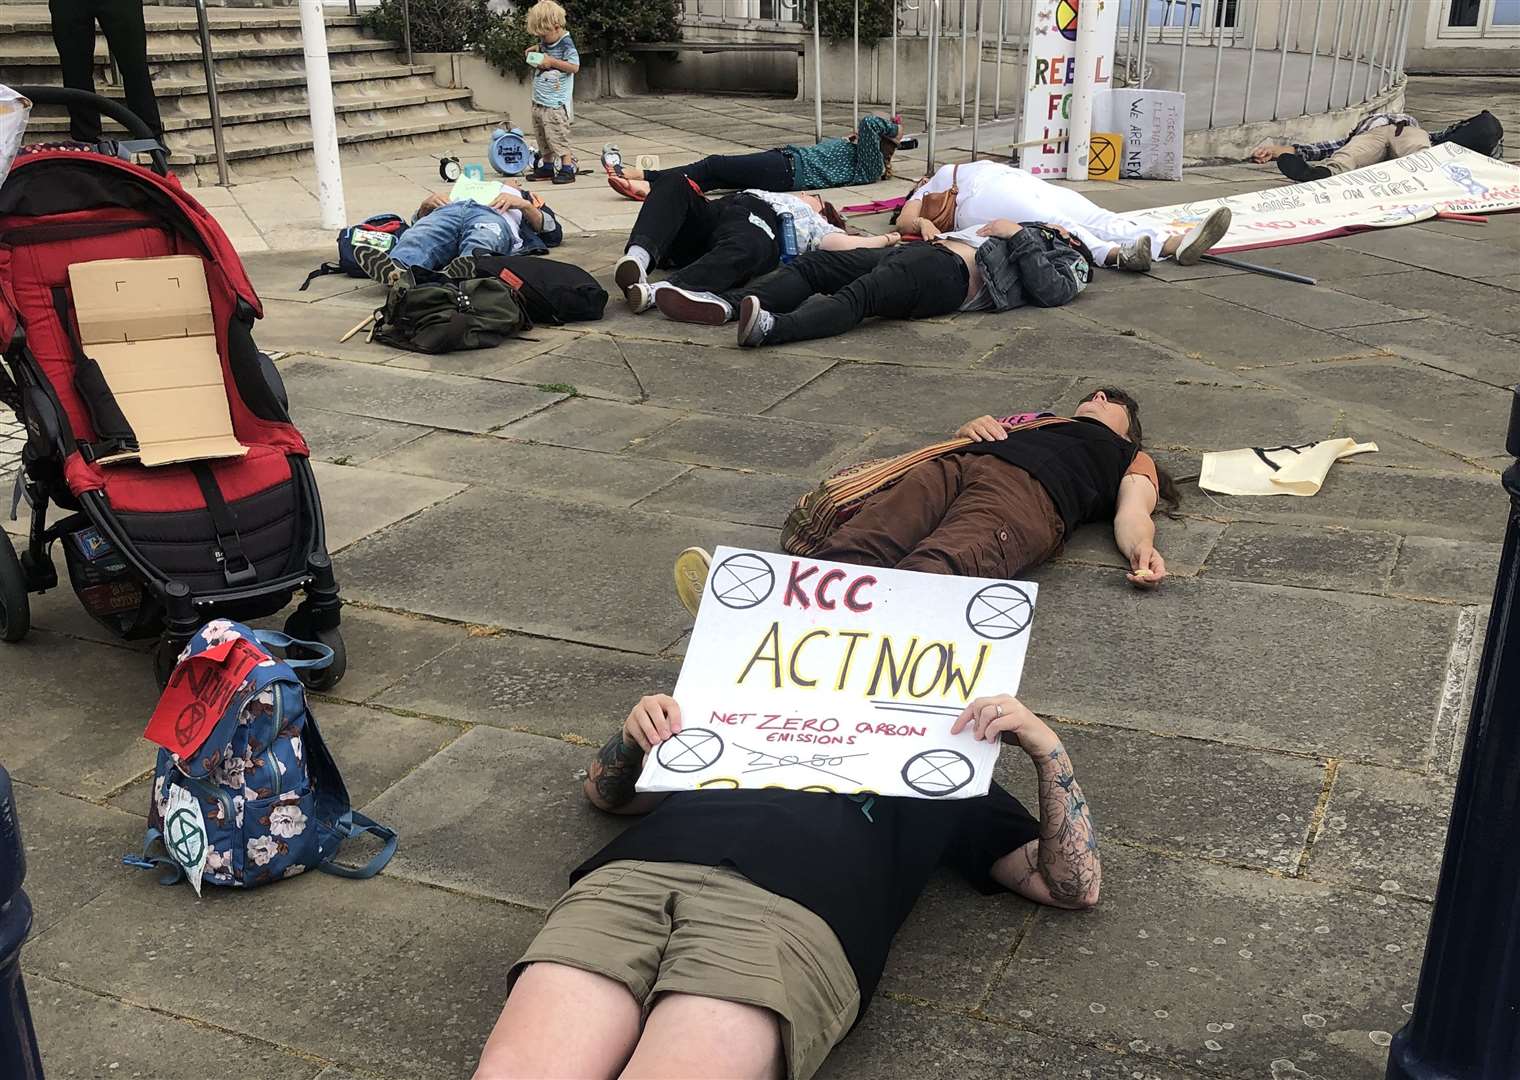 Extinction Rebellion protesters staged a "die-in" outside County Hall in Maidstone